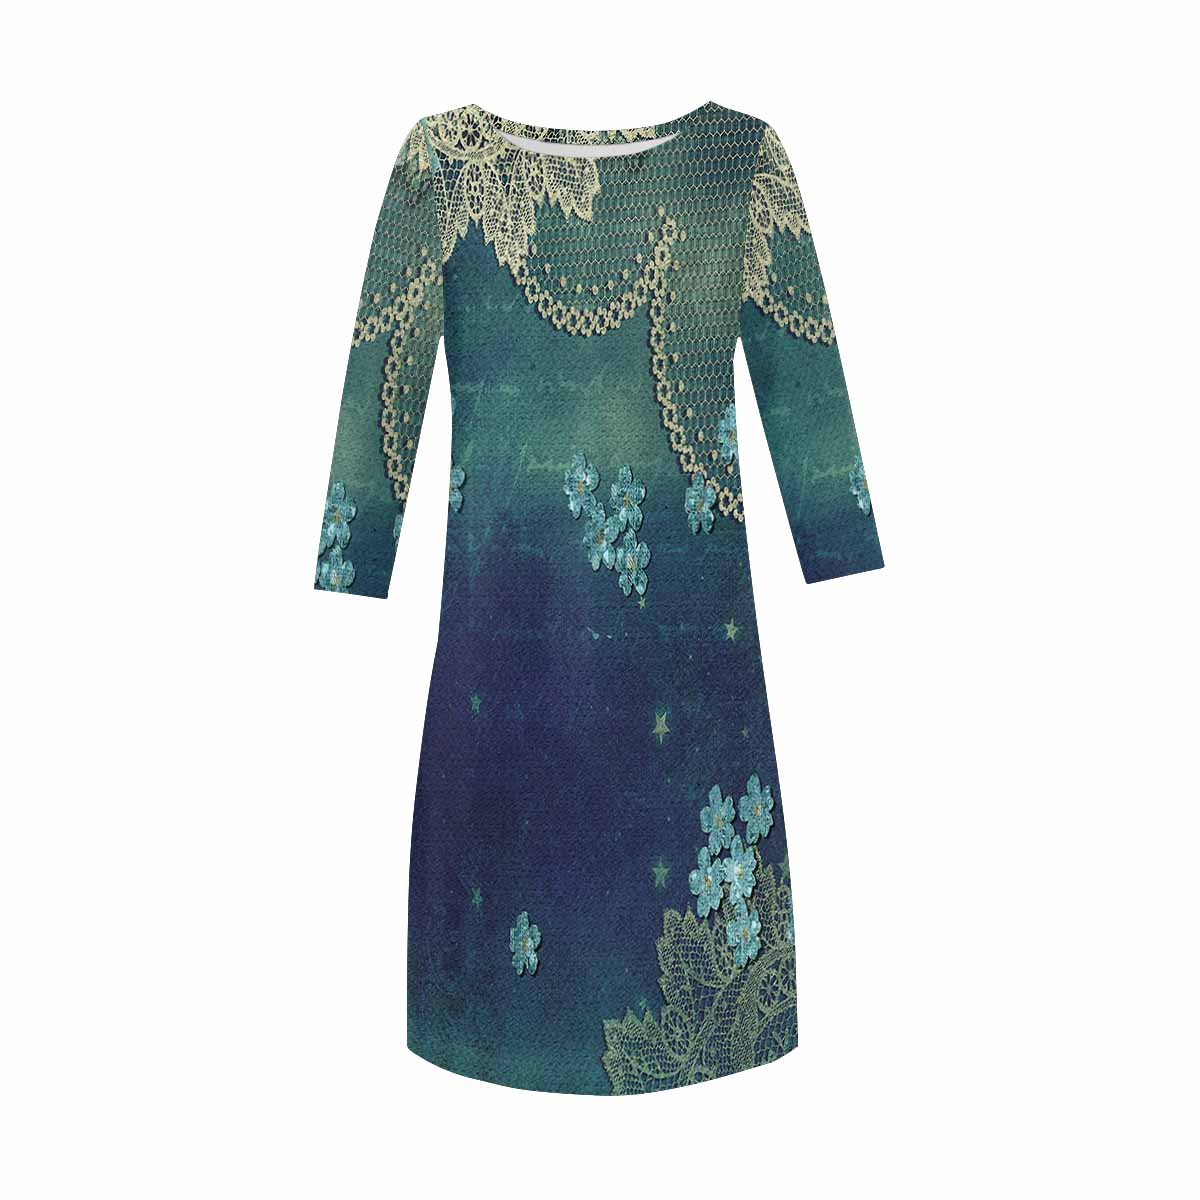 Victorian printed lace loose dress, Design 04